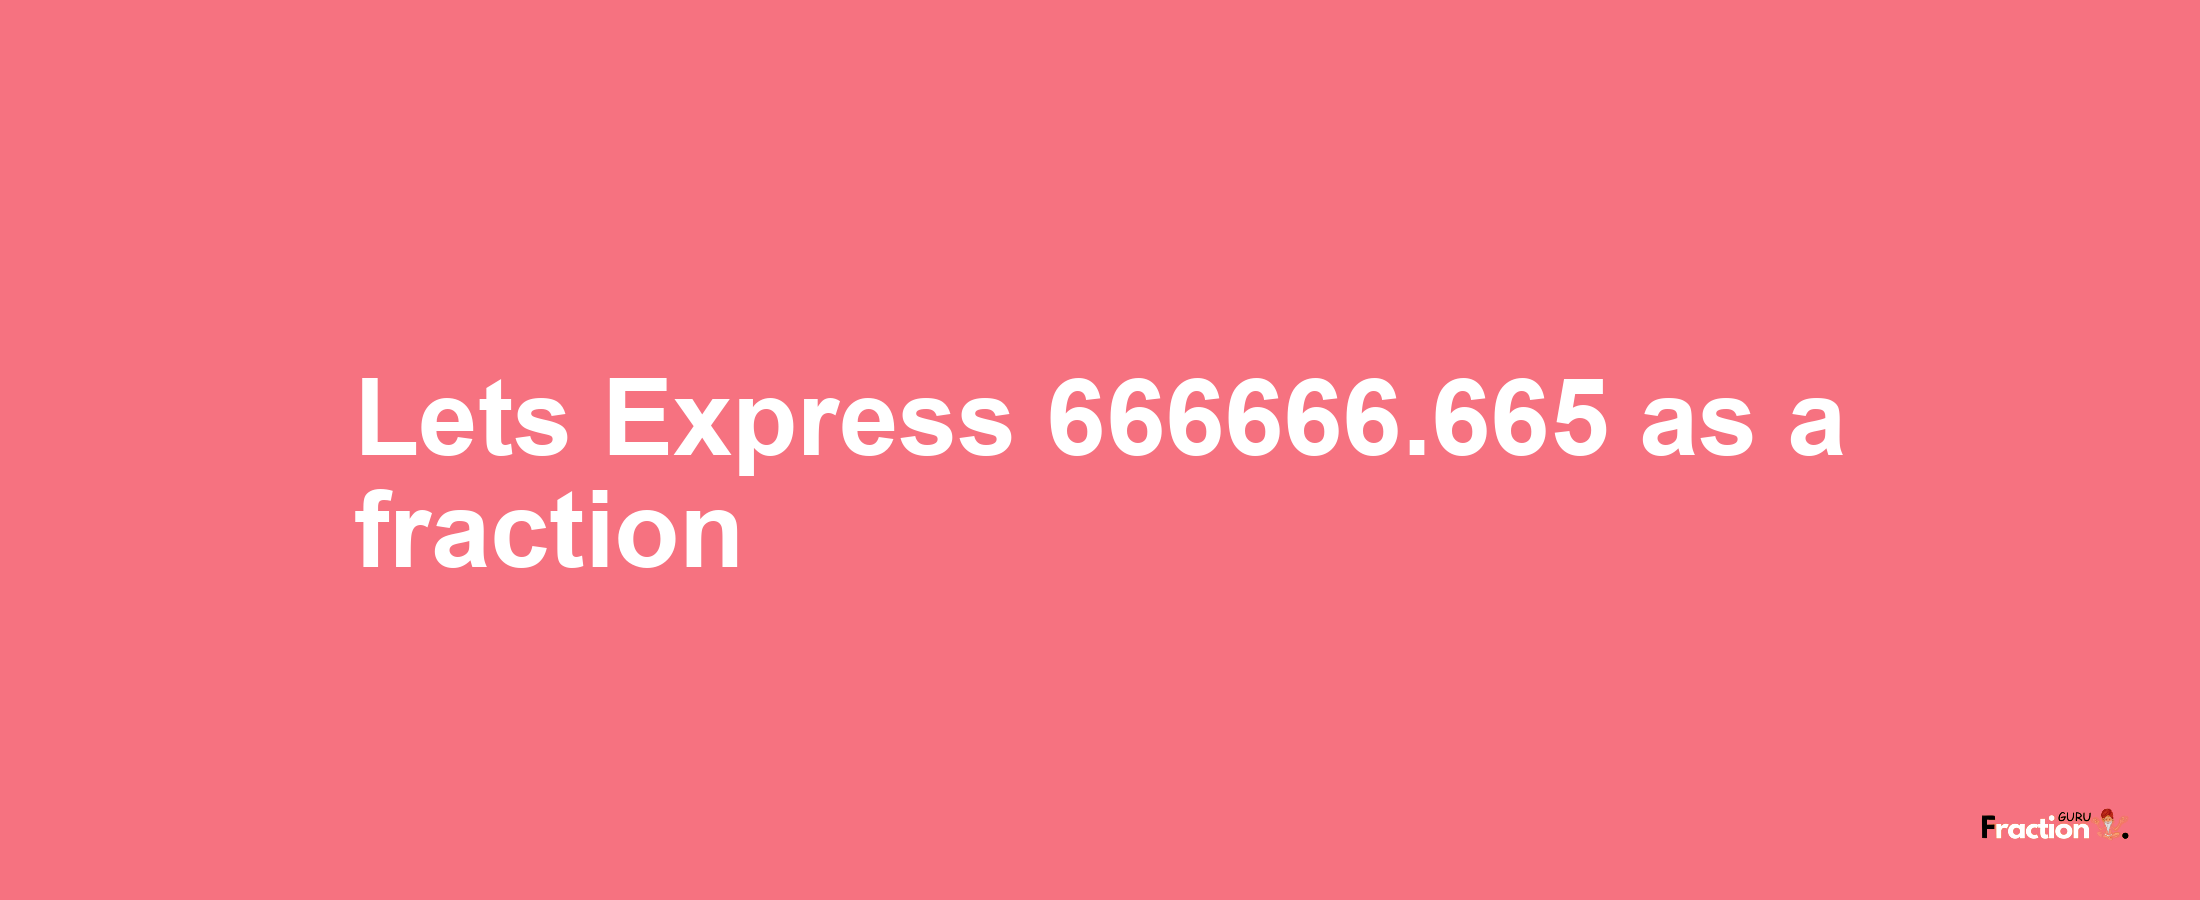 Lets Express 666666.665 as afraction